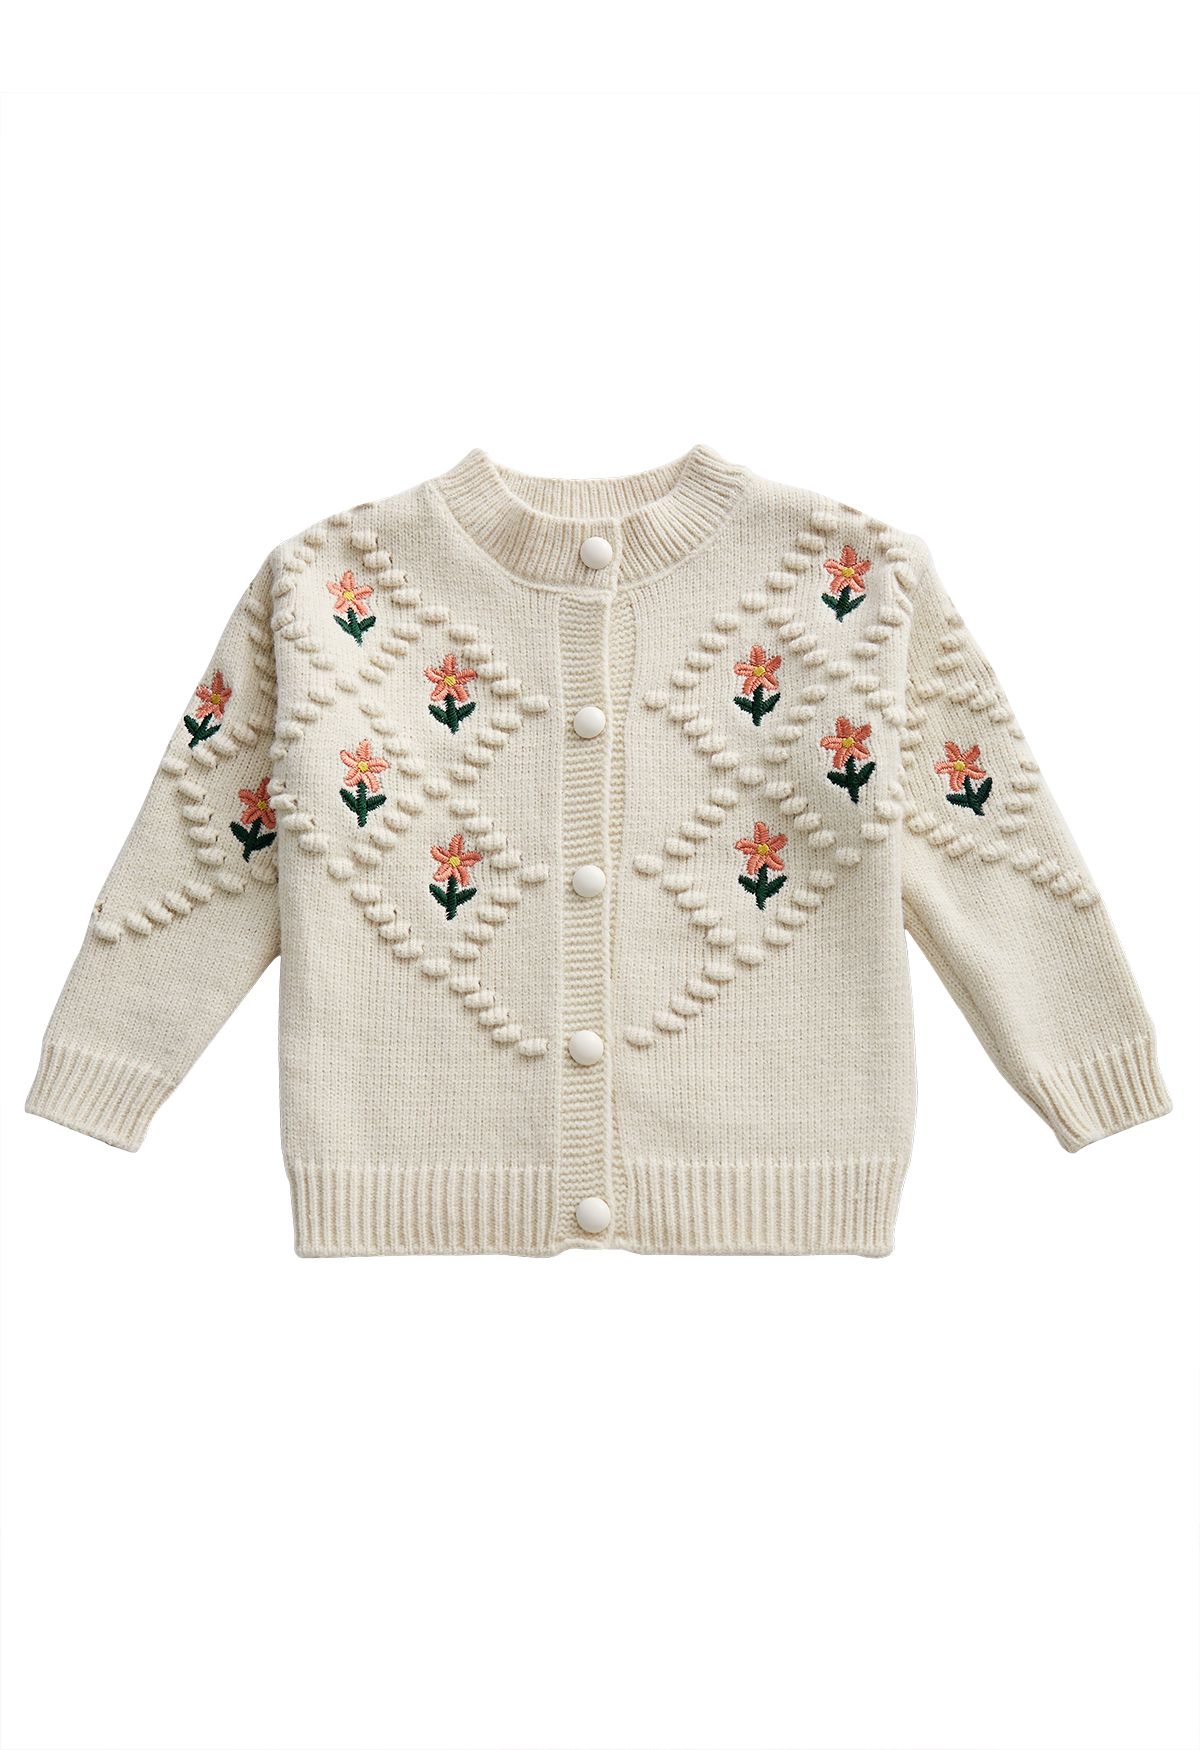 Kid's Floral Dotted Diamond Knit Cardigan in Ivory - Retro, Indie and ...